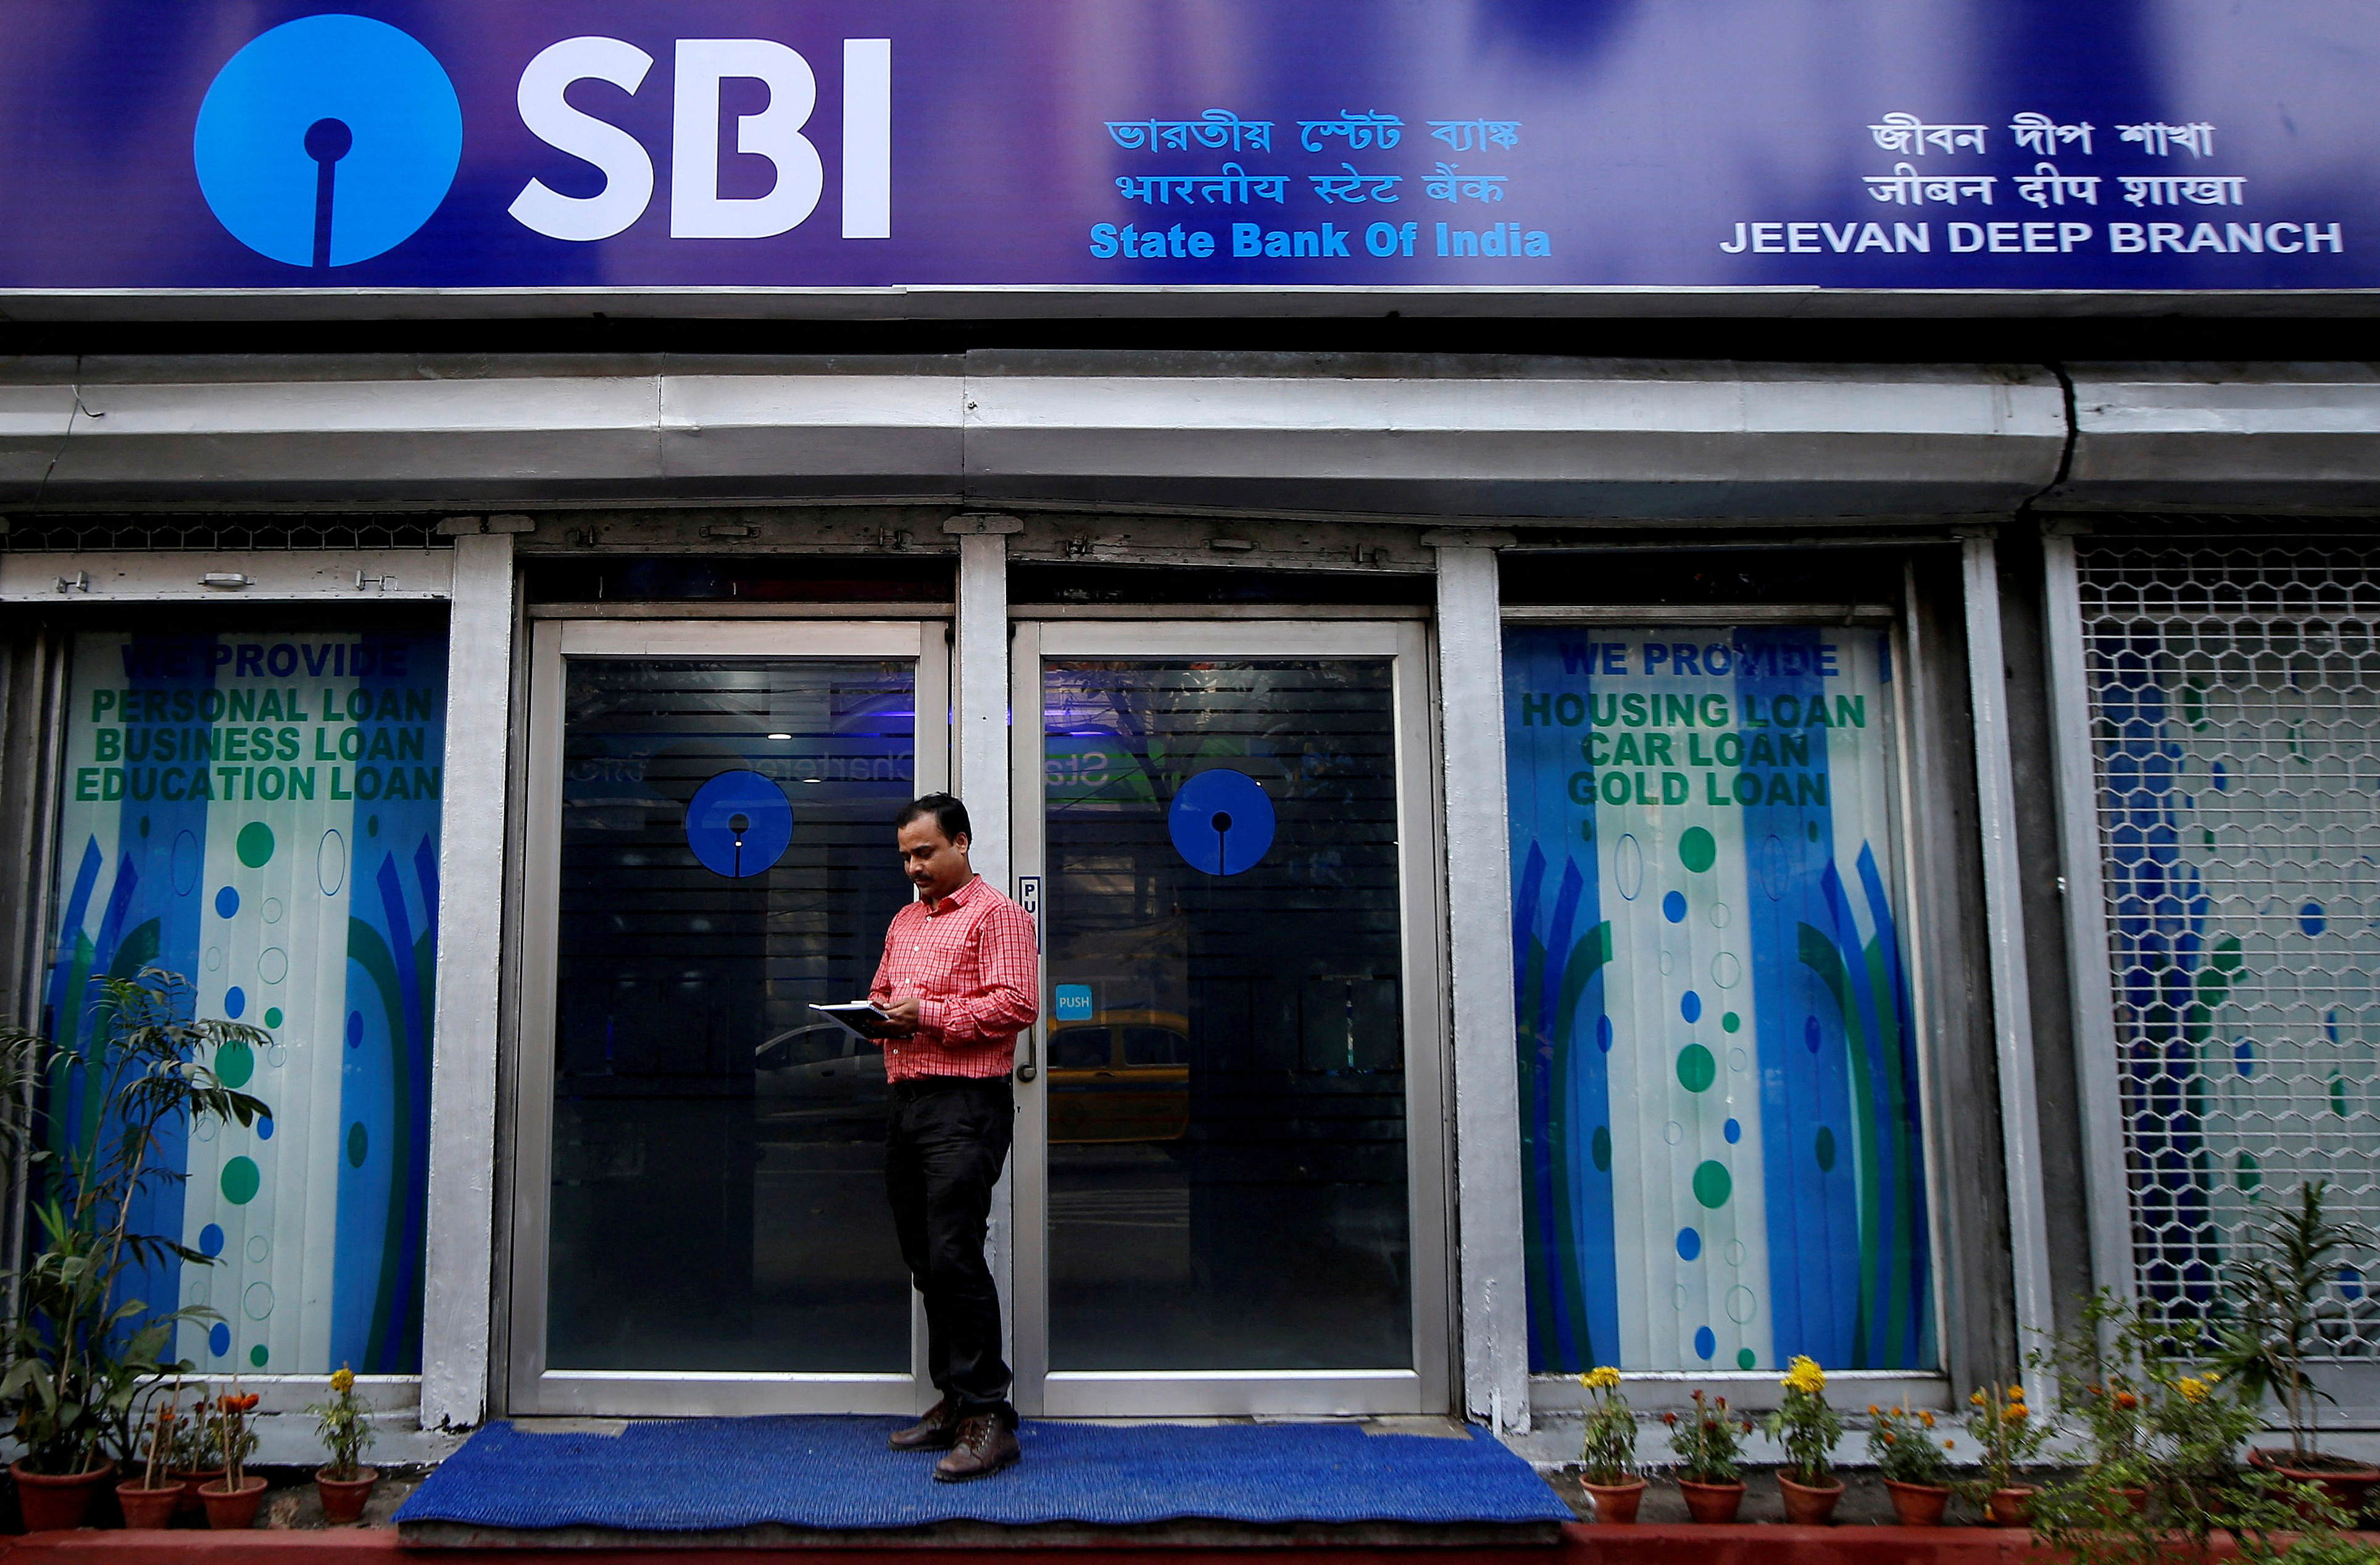 A man checks his mobile phone in front of a State Bank of India (SBI) branch in Kolkata